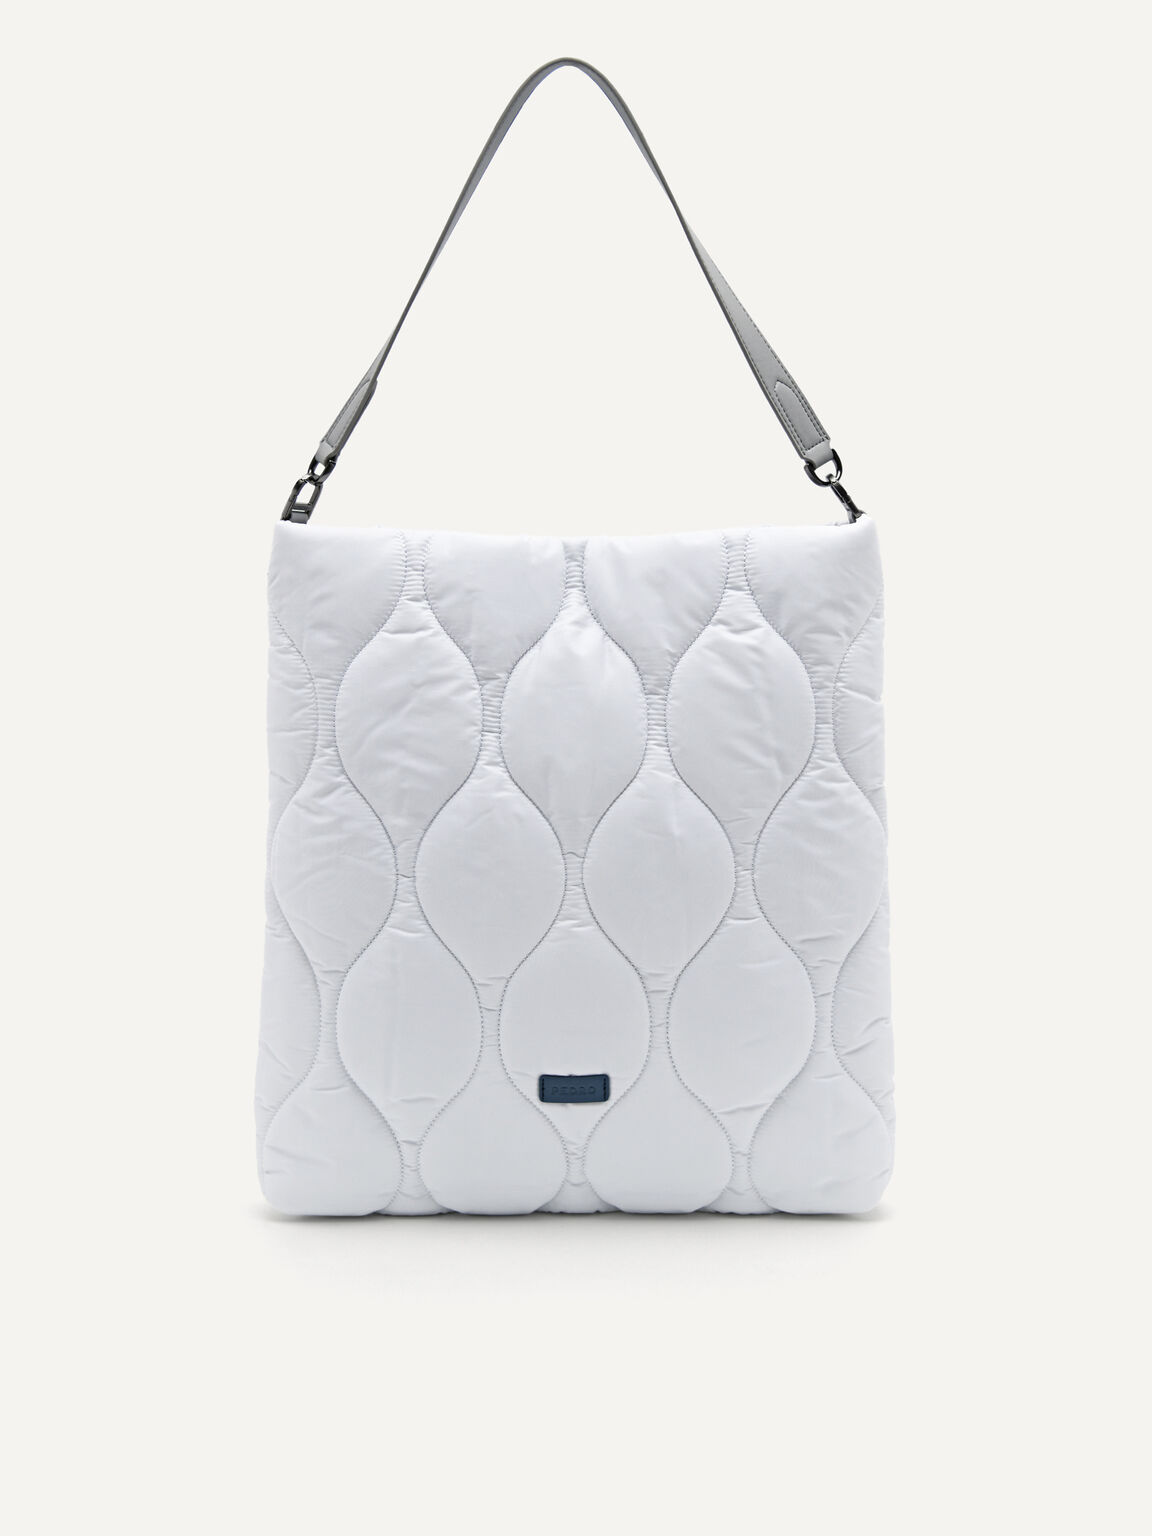 Plush Quilted Single Strap Tote, White